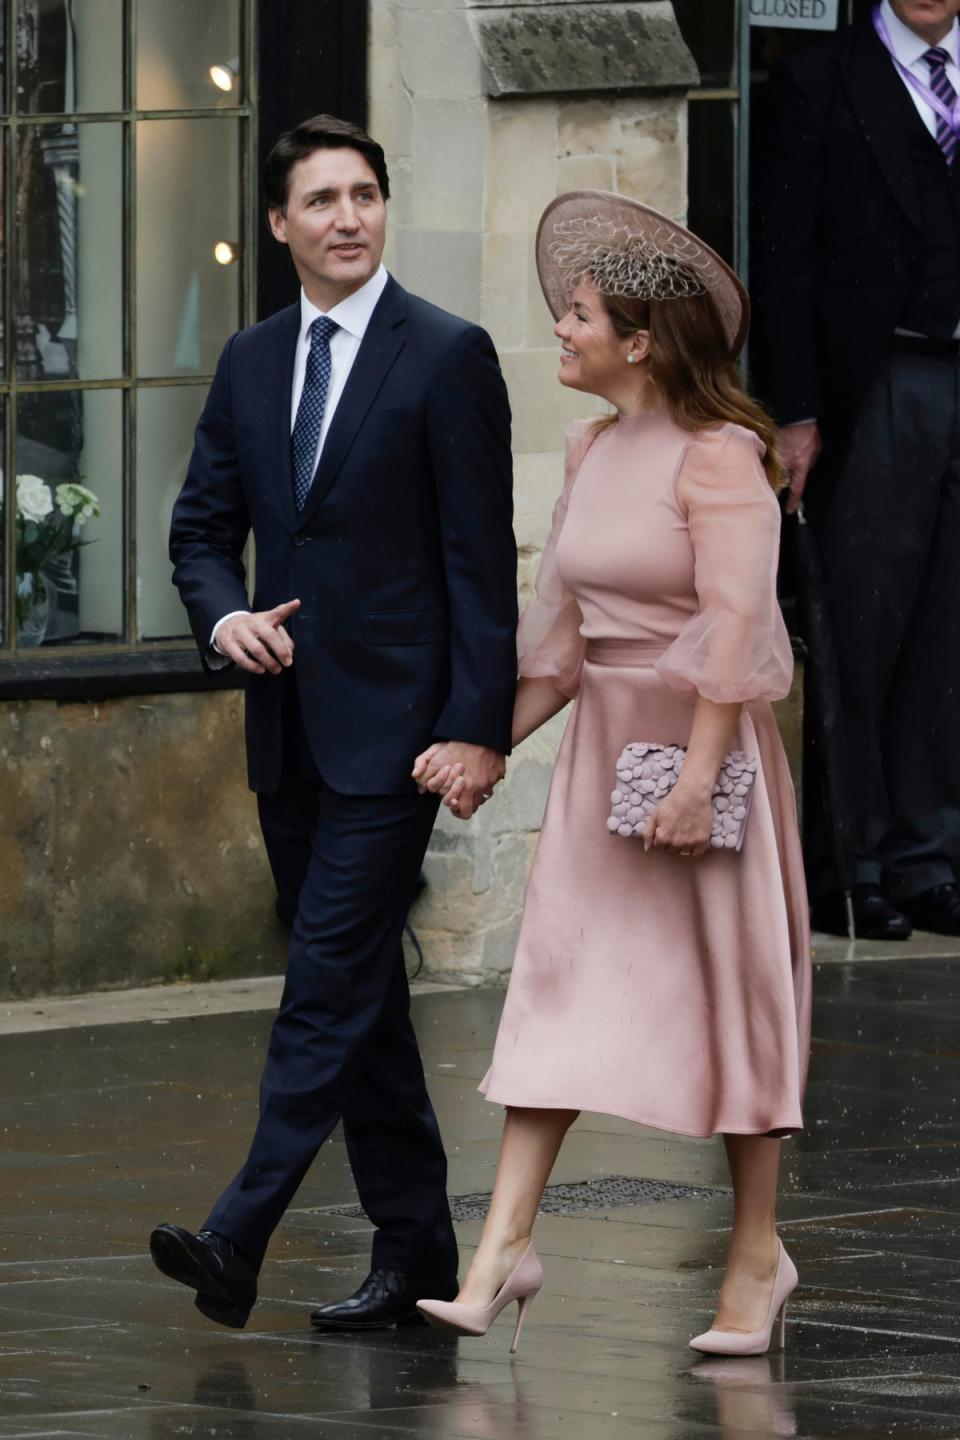 Justin Trudeau prime minister of Canada with his wife Sophie (Getty Images)